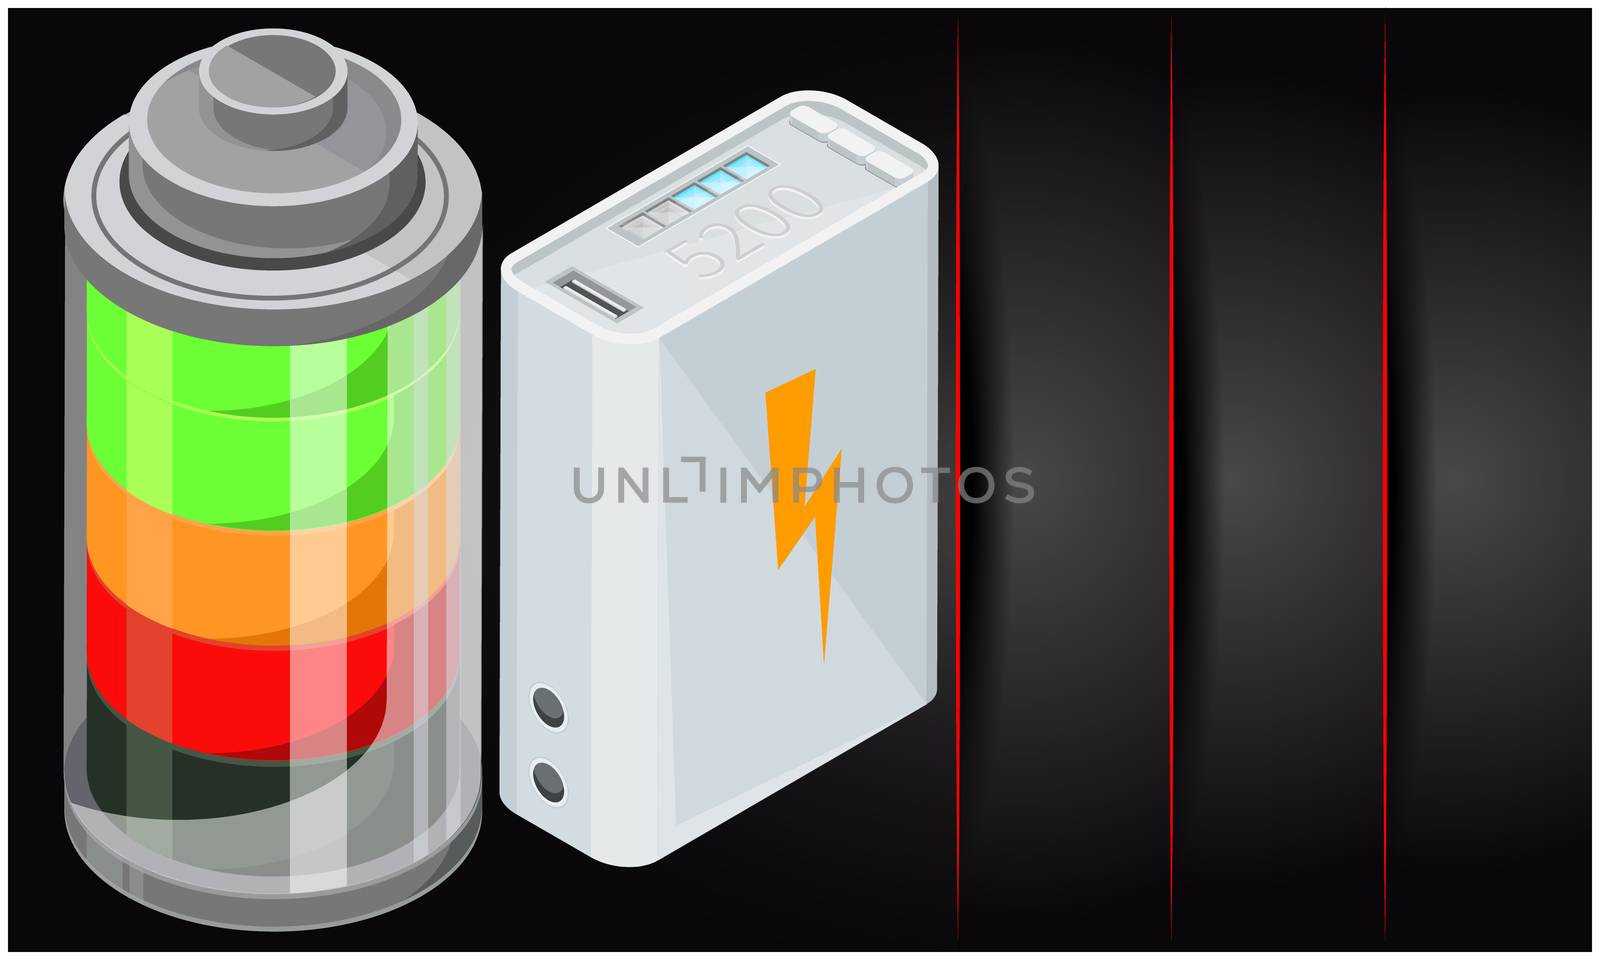 design of different types of battery on abstract backgrounds